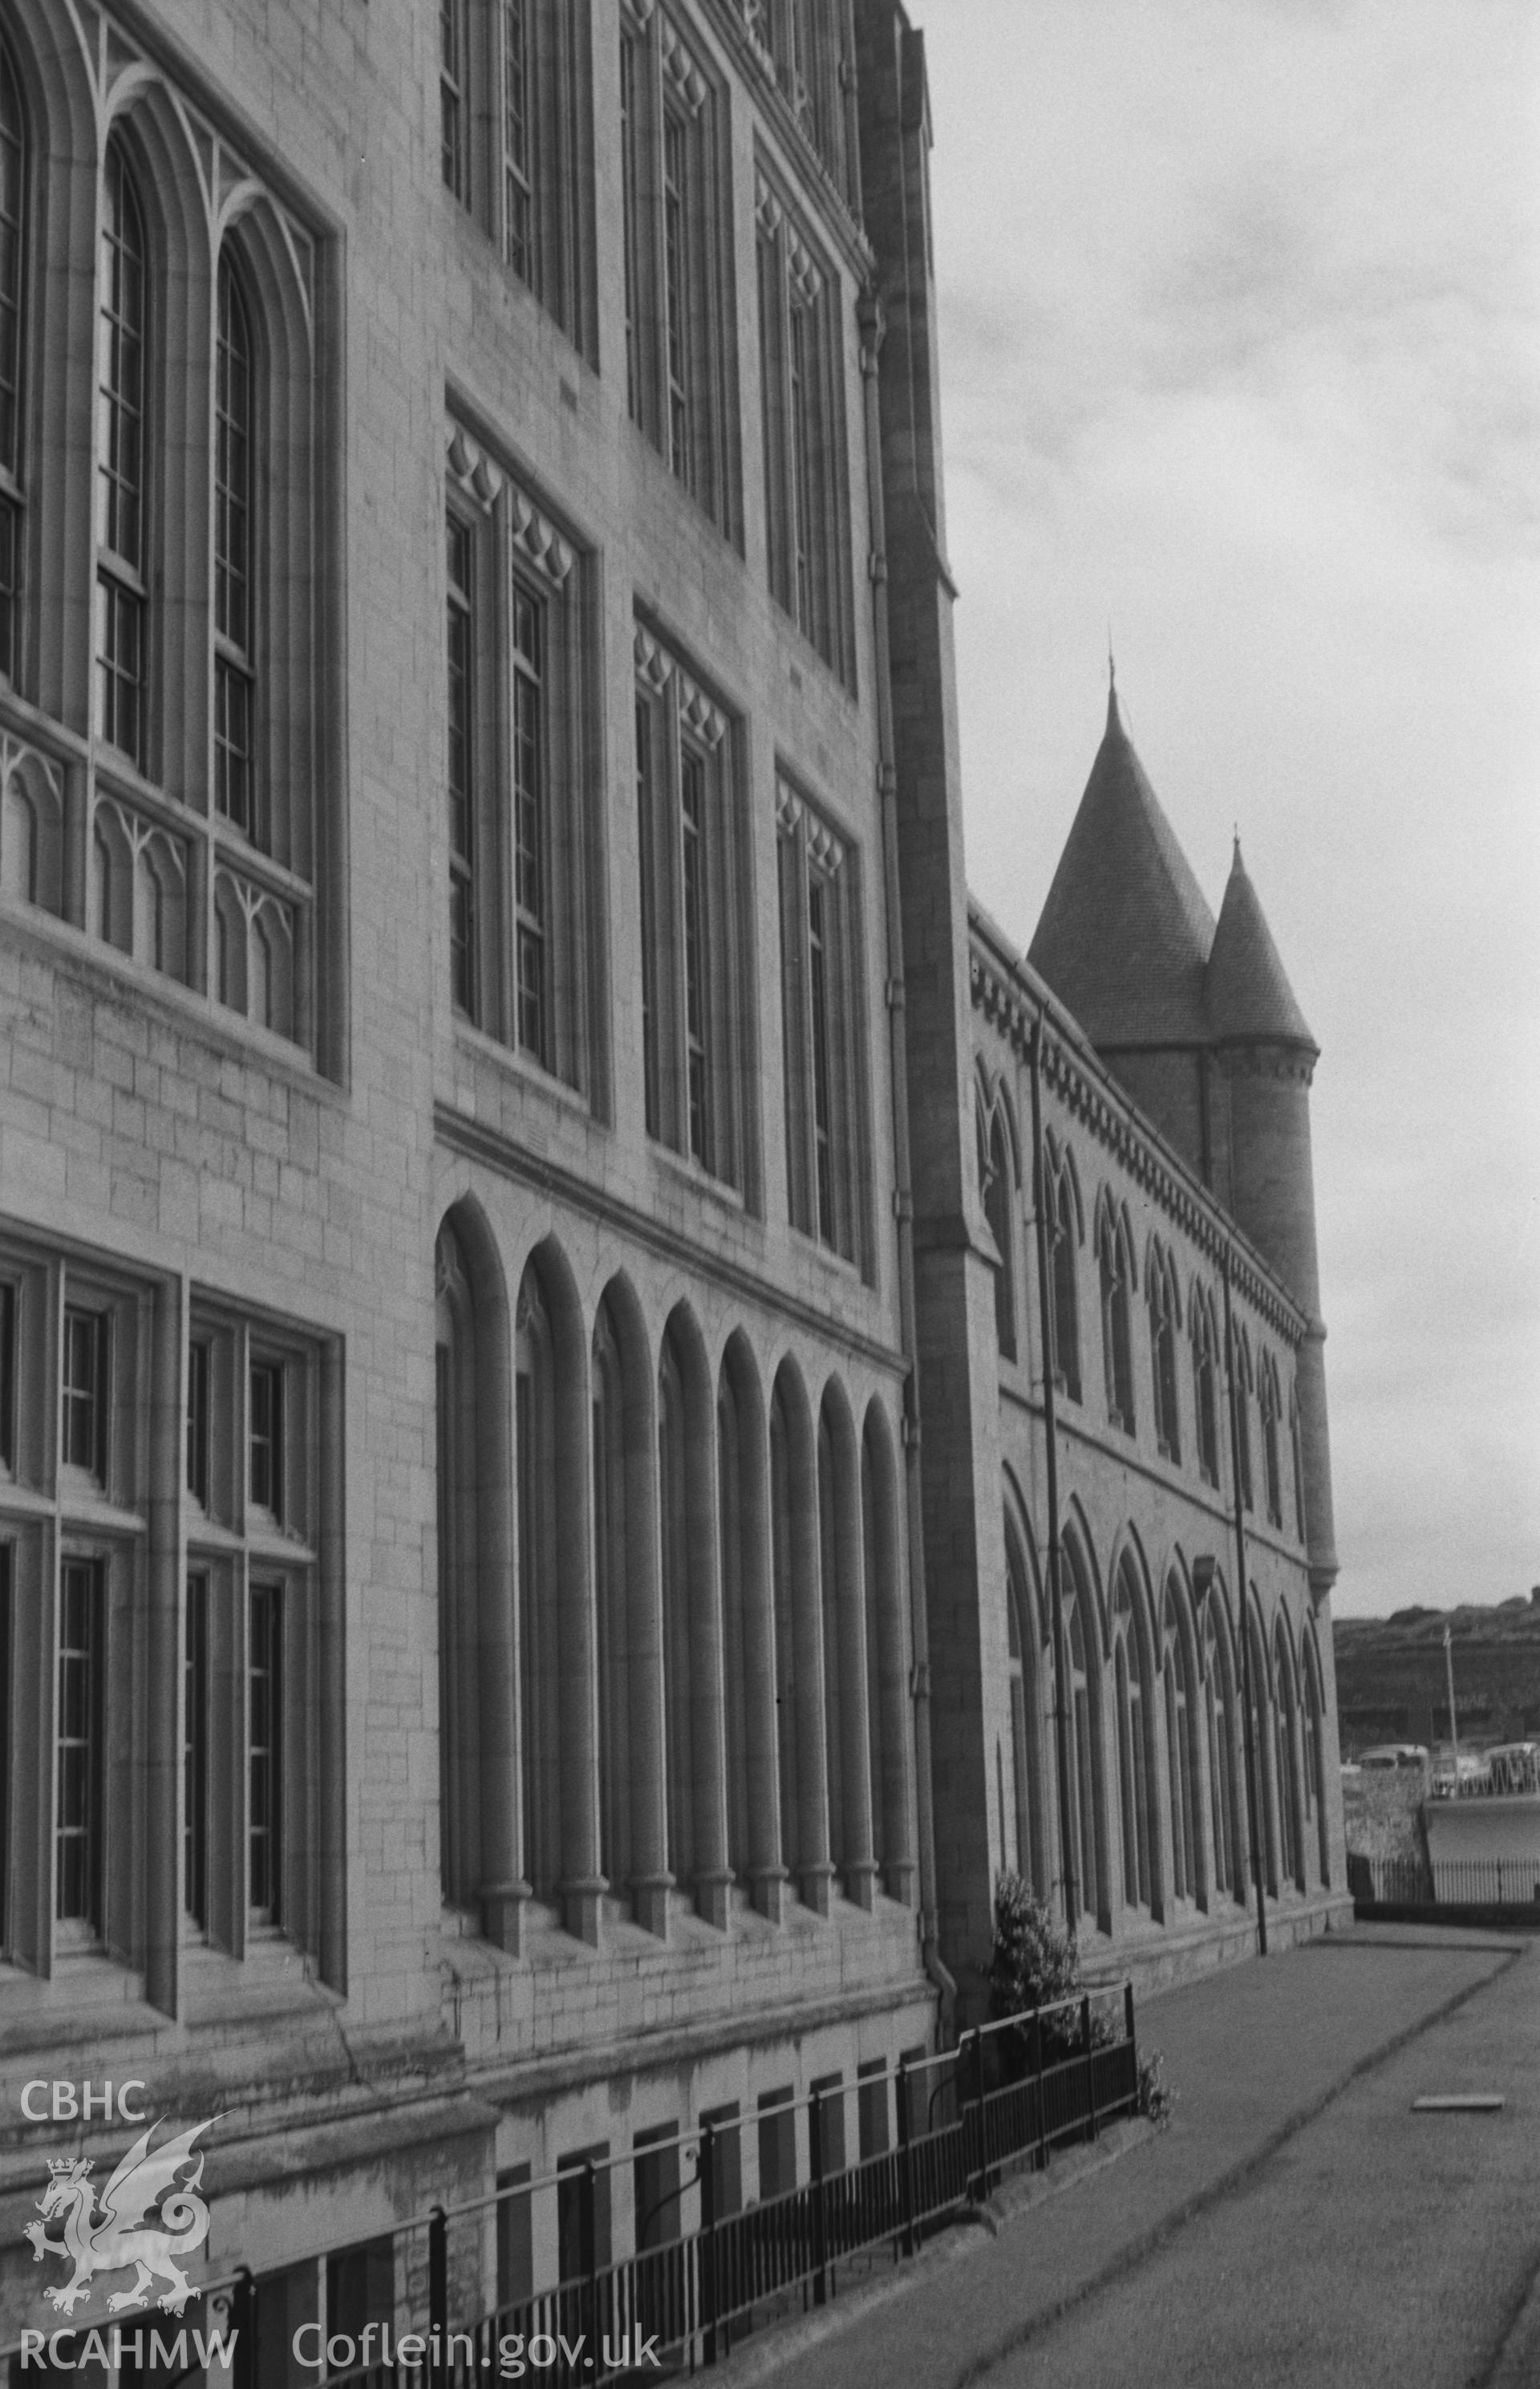 Digital copy of a black and white negative showing detail of the north west facing side of the Old College, on Aberystwyth promenade. Photographed by Arthur O. Chater on 15th August 1967 from Grid Reference SN 581 817.